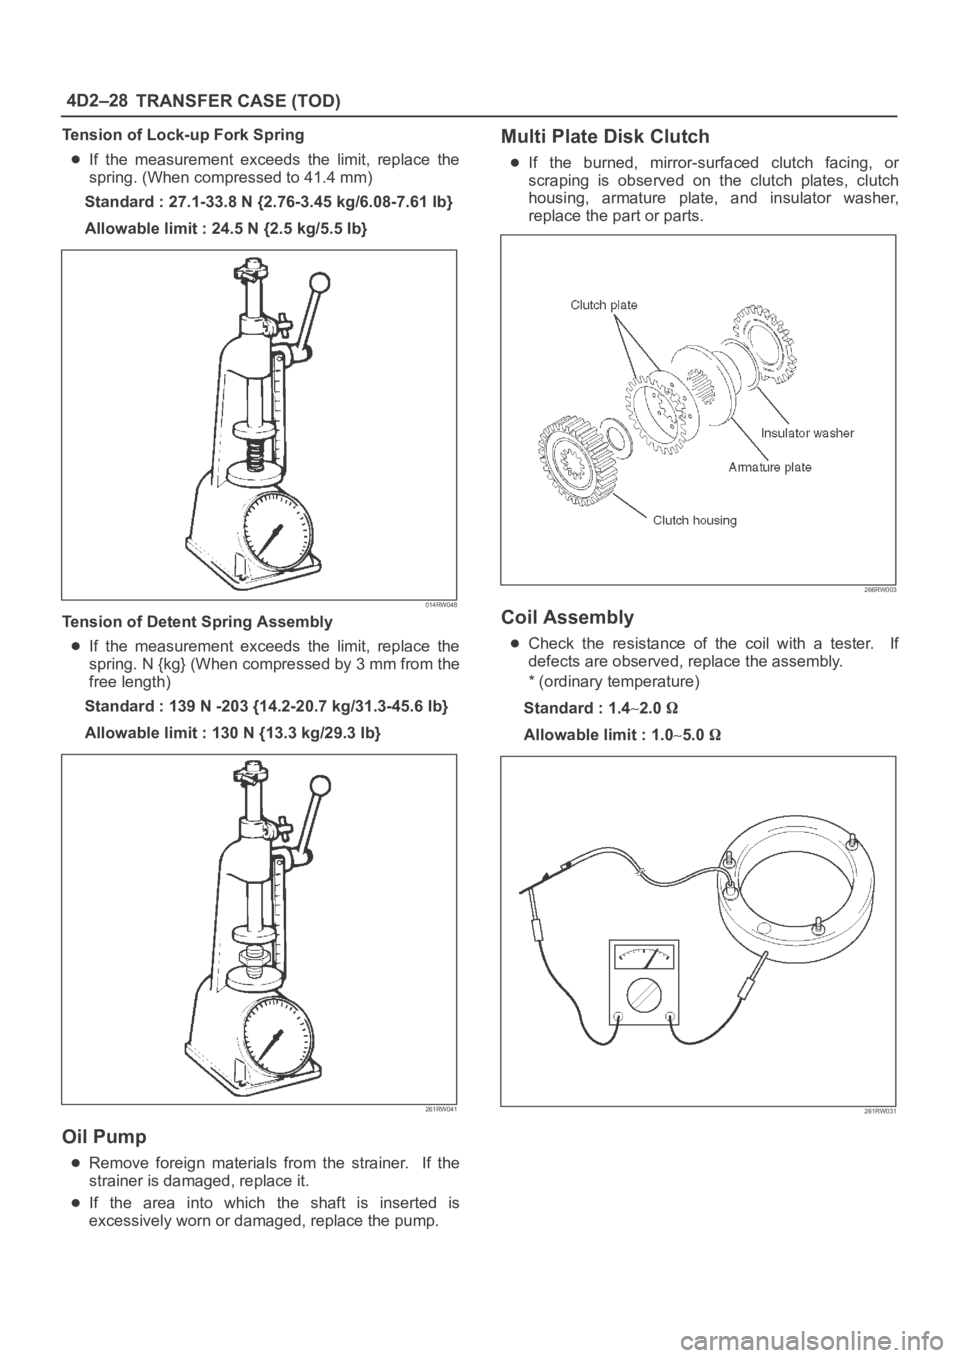 OPEL FRONTERA 1998  Workshop Manual 4D2–28
TRANSFER CASE (TOD)
Tension of Lock-up Fork Spring
If  the  measurement  exceeds  the  limit,  replace  the
spring. (When compressed to 41.4 mm)
Standard : 27.1-33.8 N {2.76-3.45 kg/6.08-7.61